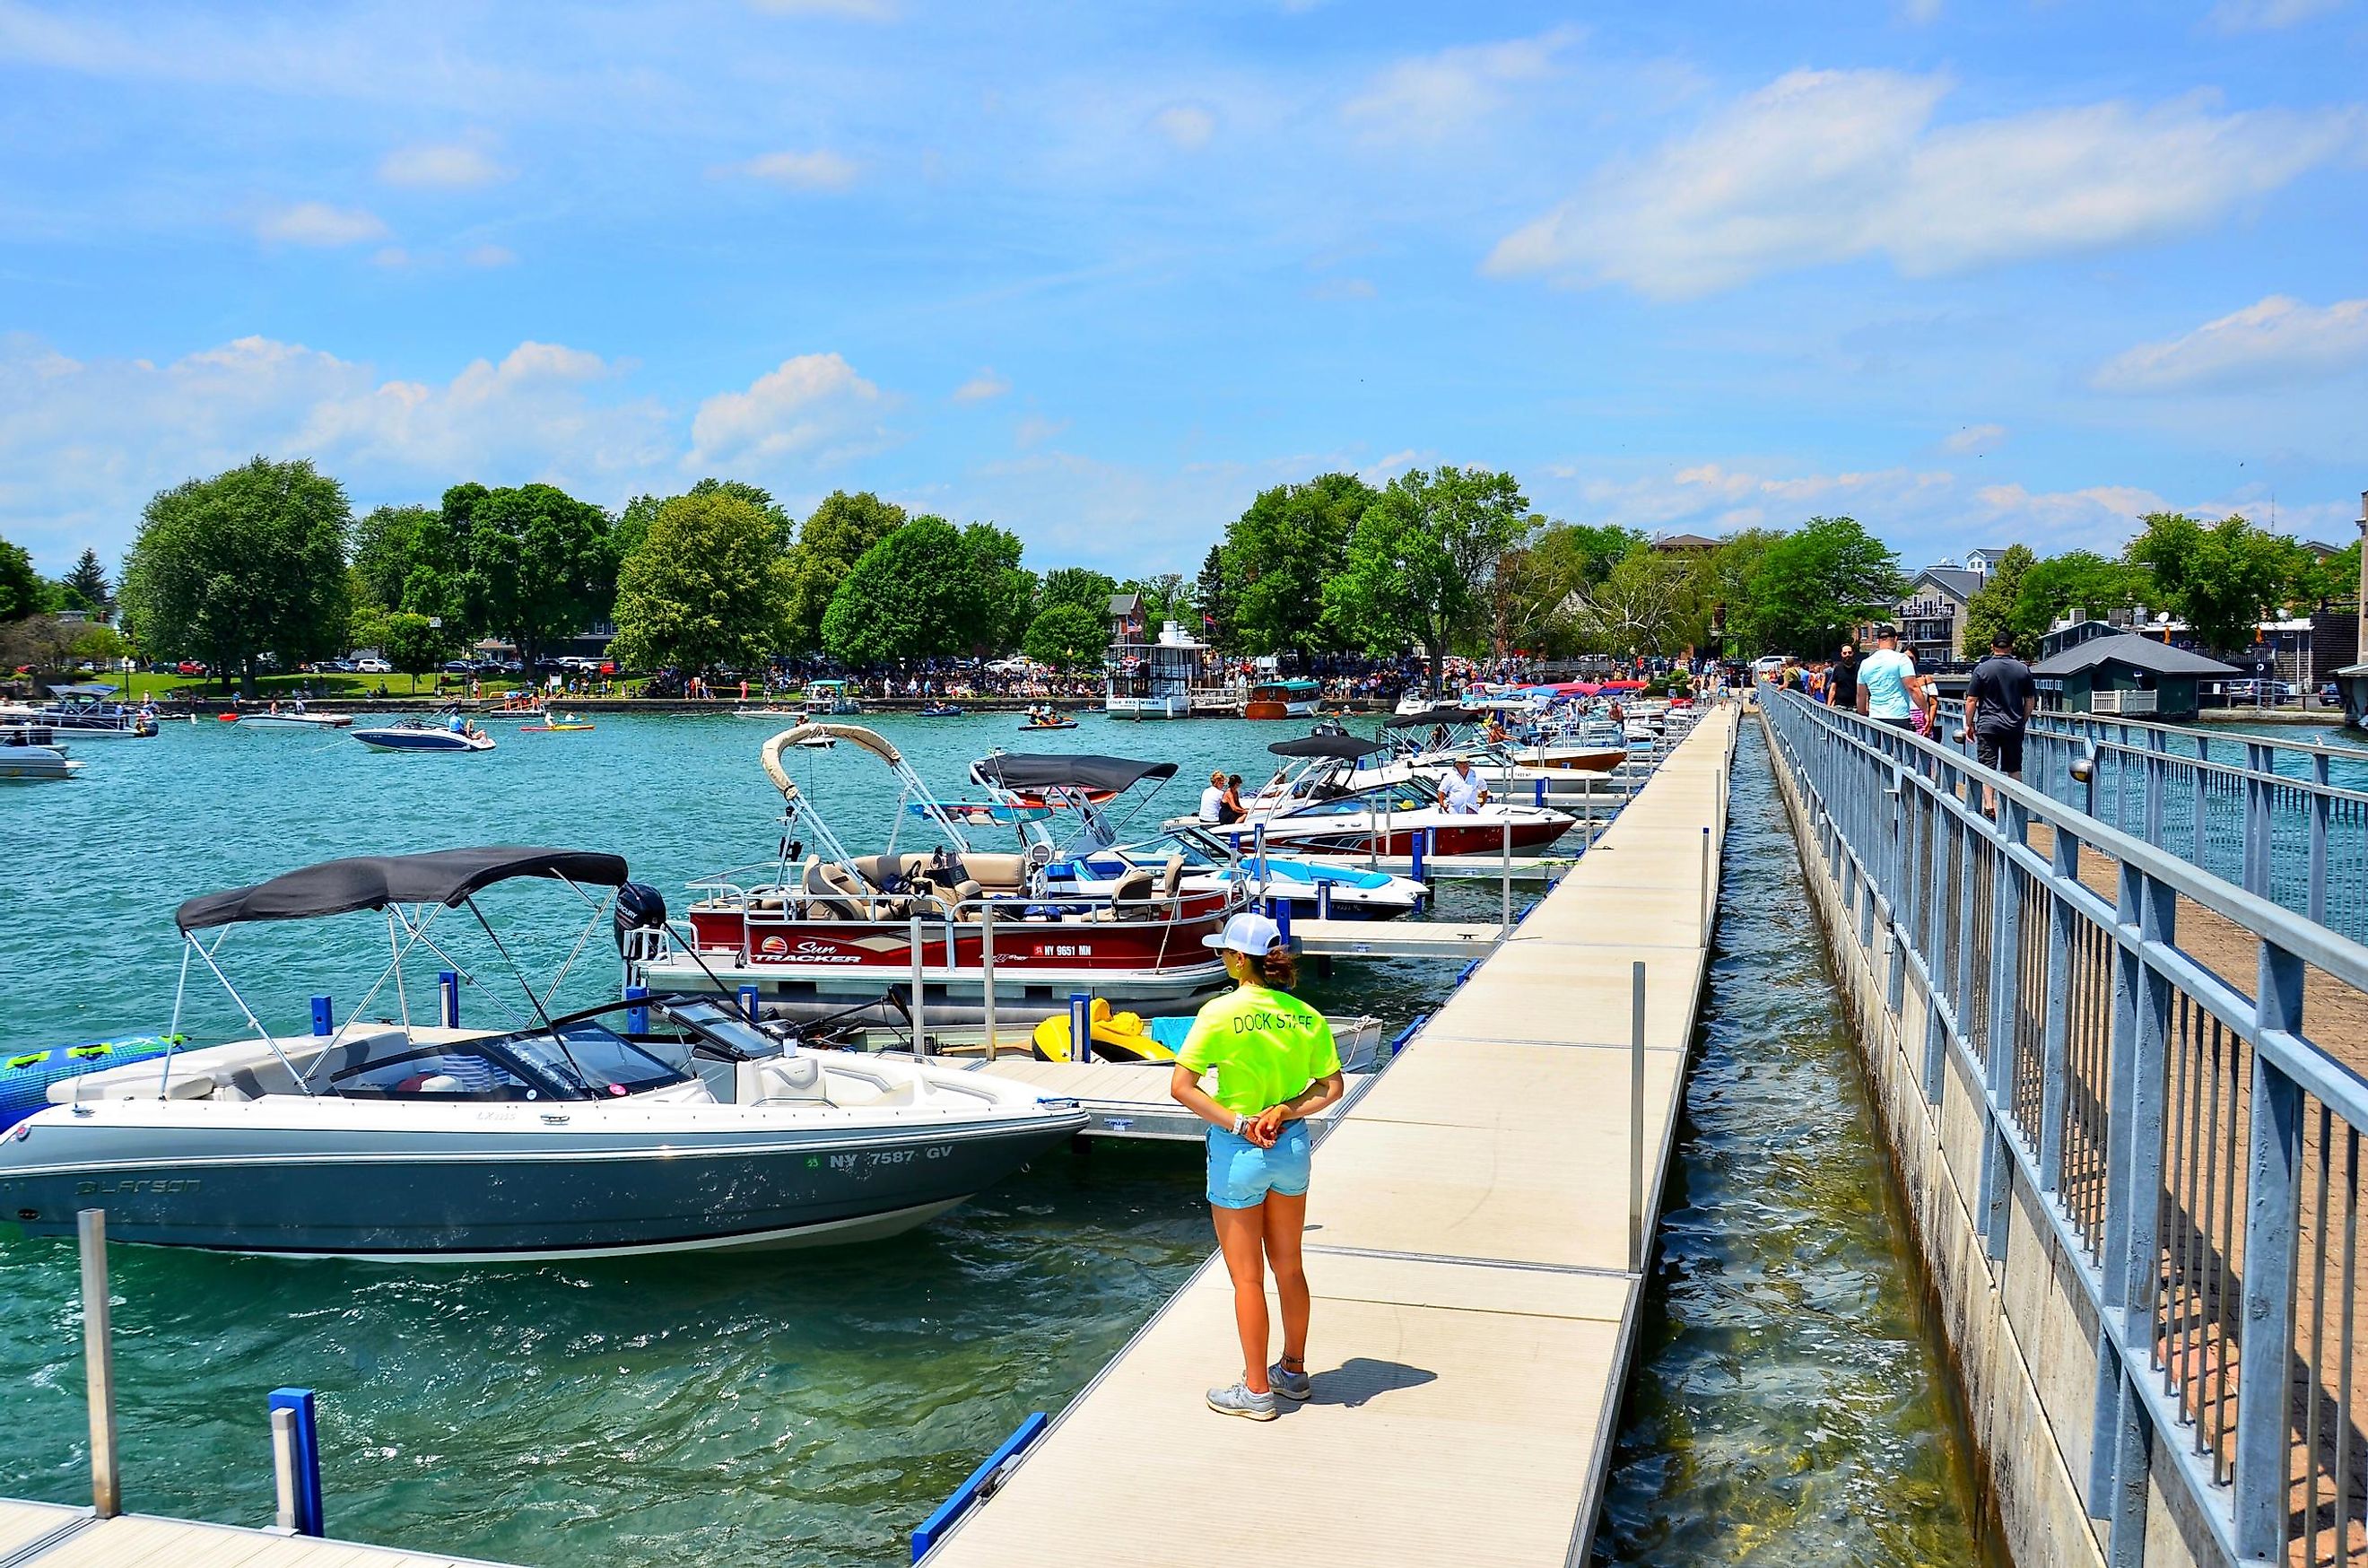 SKANEATELES, NEW YORK - June 27, 2021: Pier and luxury boats docked in the Skaneateles Lake, one of the Finger Lakes. A crowded day due to high school graduation celebration event. Dock staff on site.